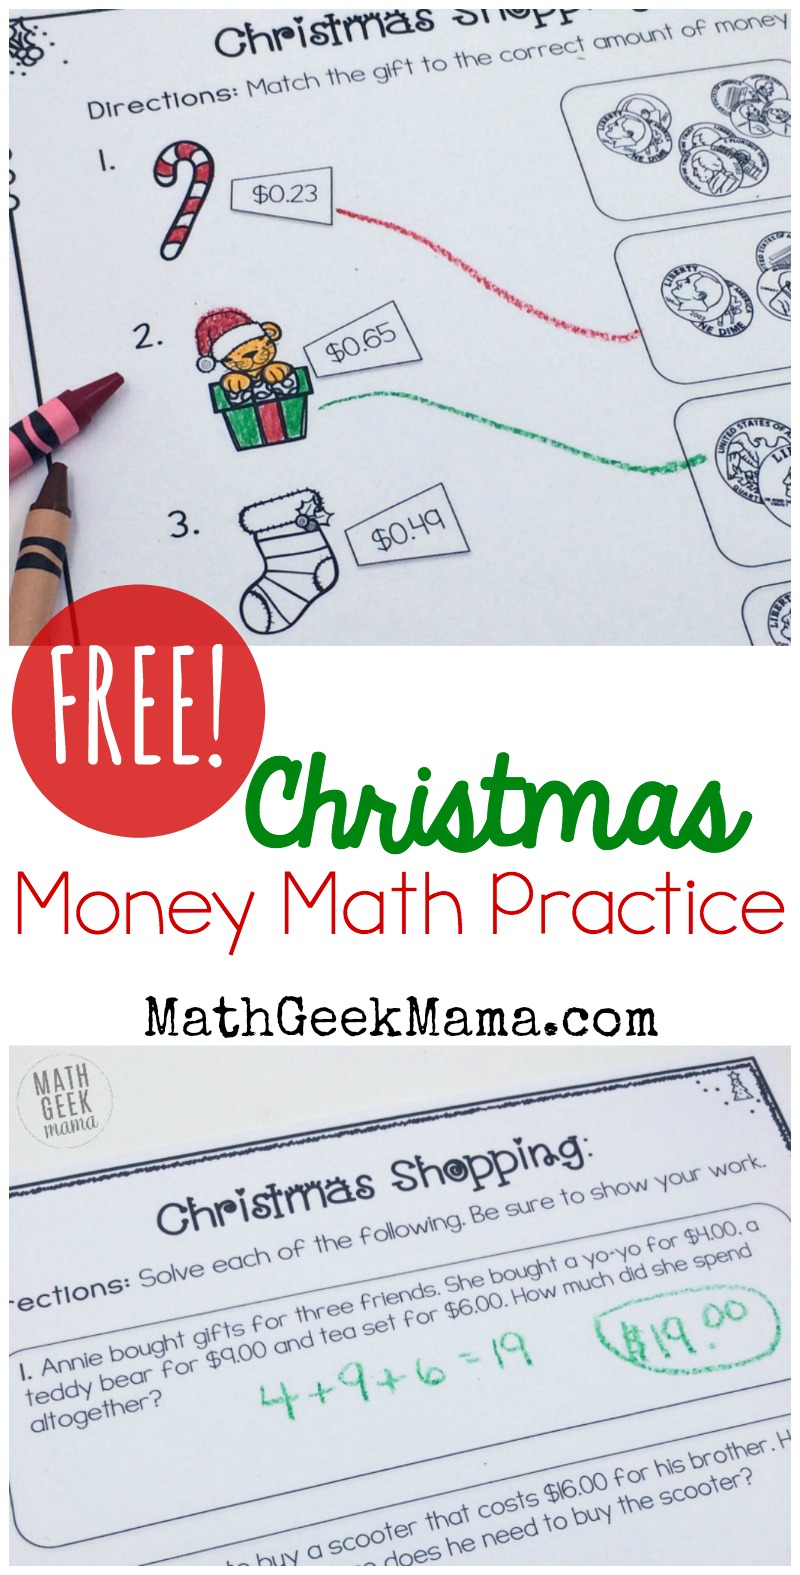 Need some extra practice with counting change? This set of Christmas themed money math pages is a fun way to work on essential math skills! Includes practice with counting coins as well as money word problems. 